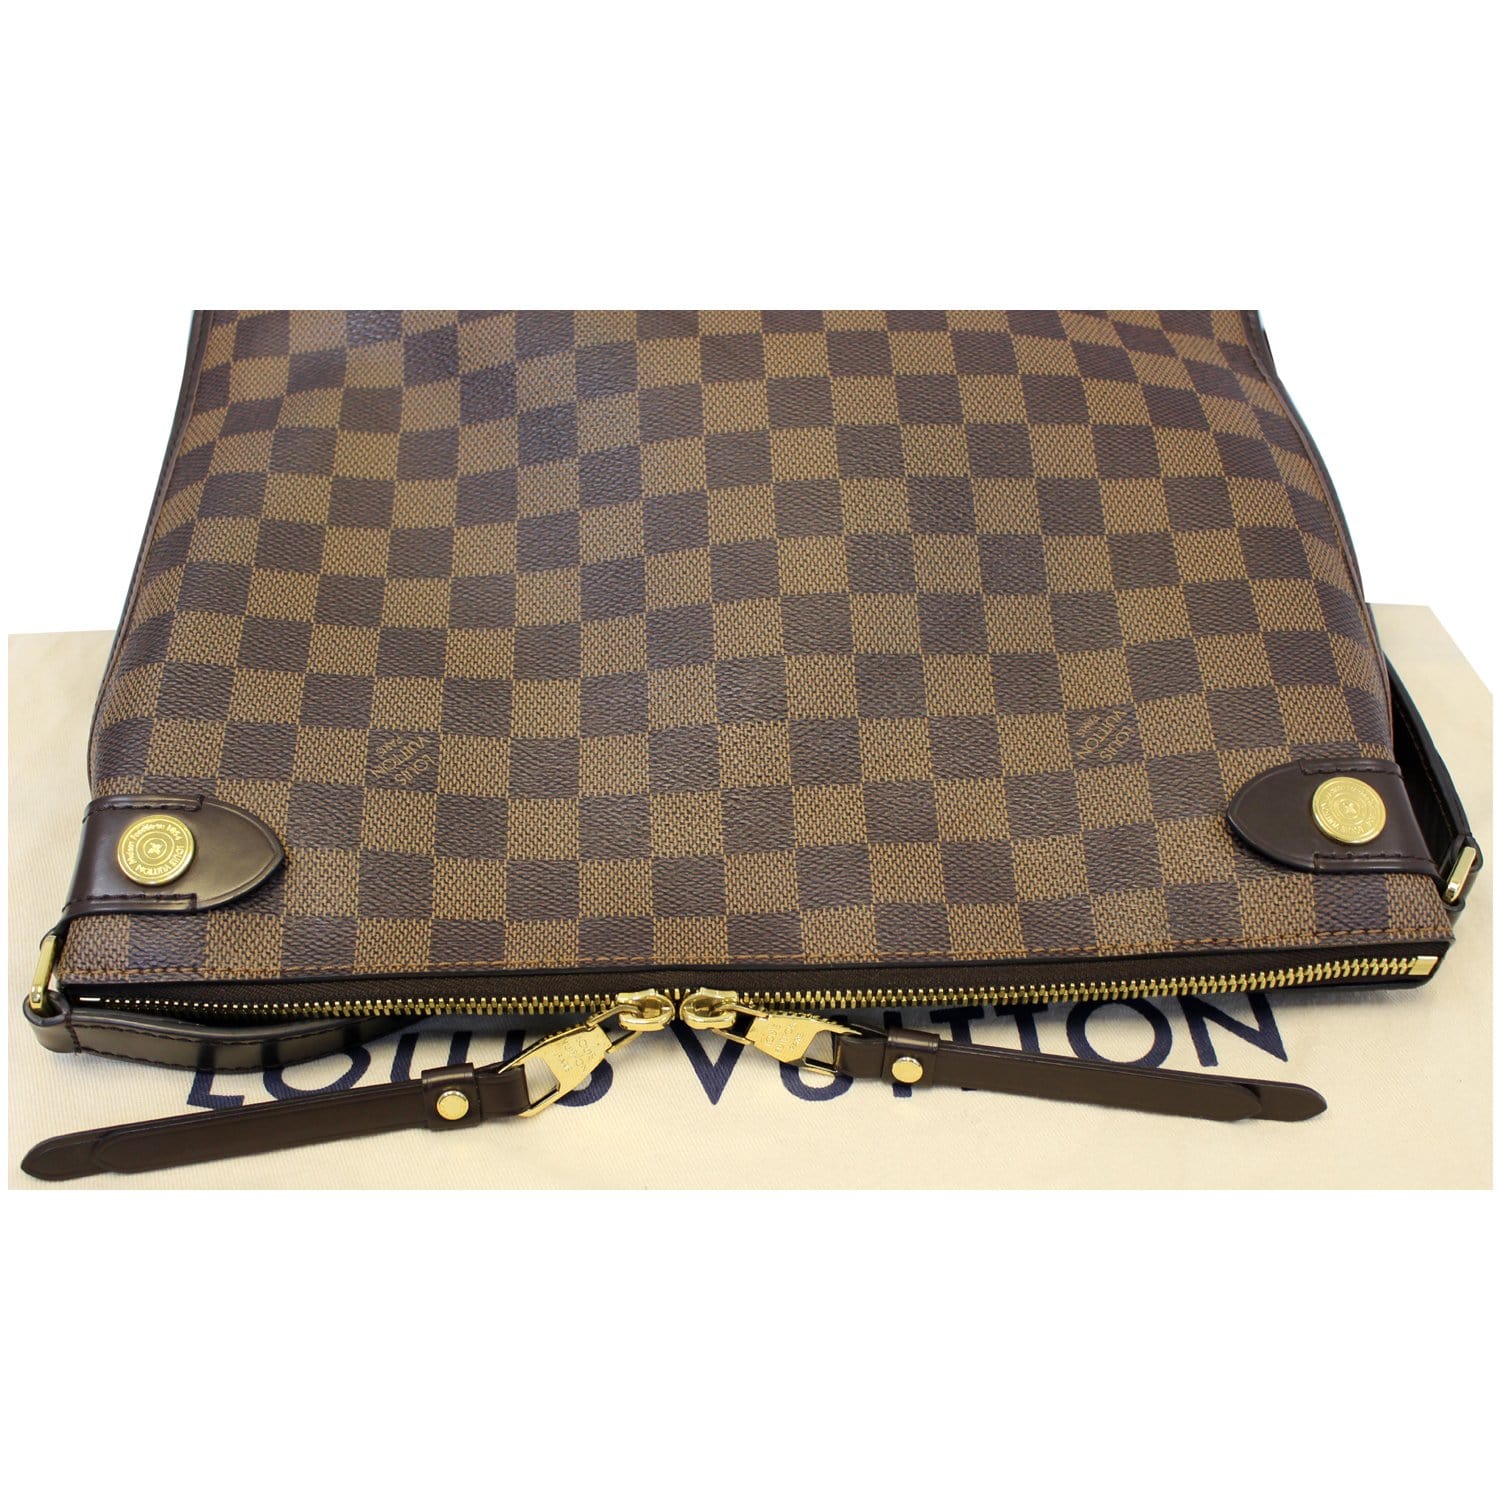 Just in! Louis Vuitton Duomo crossbody! Gorgeous with adjustable